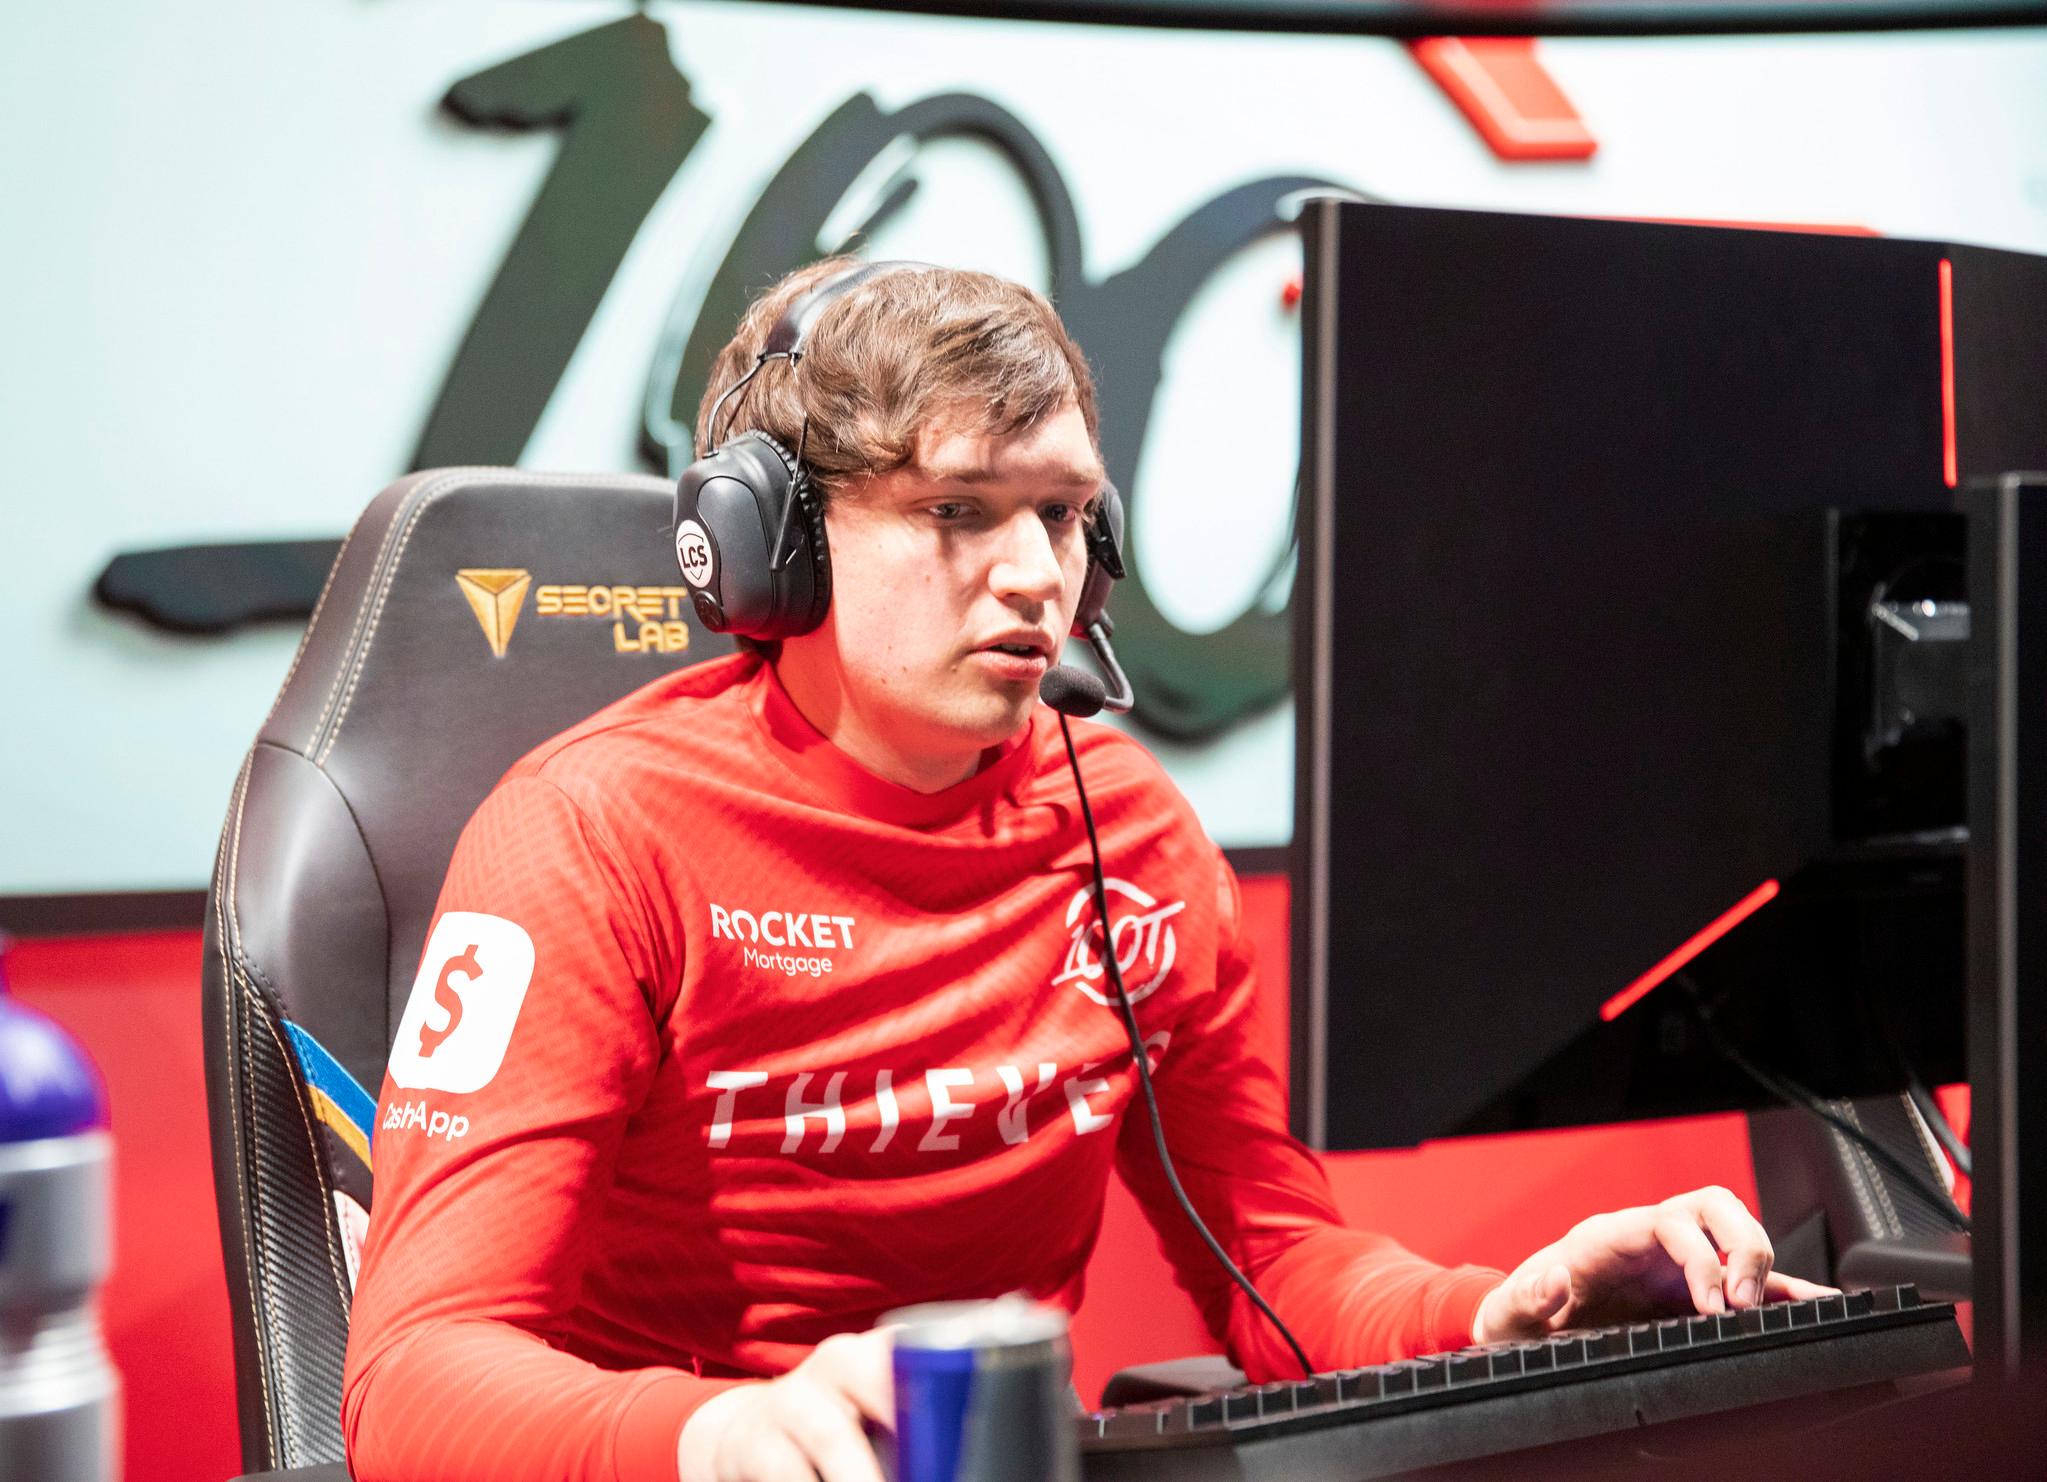 Meteos playing LCS Summer 2020